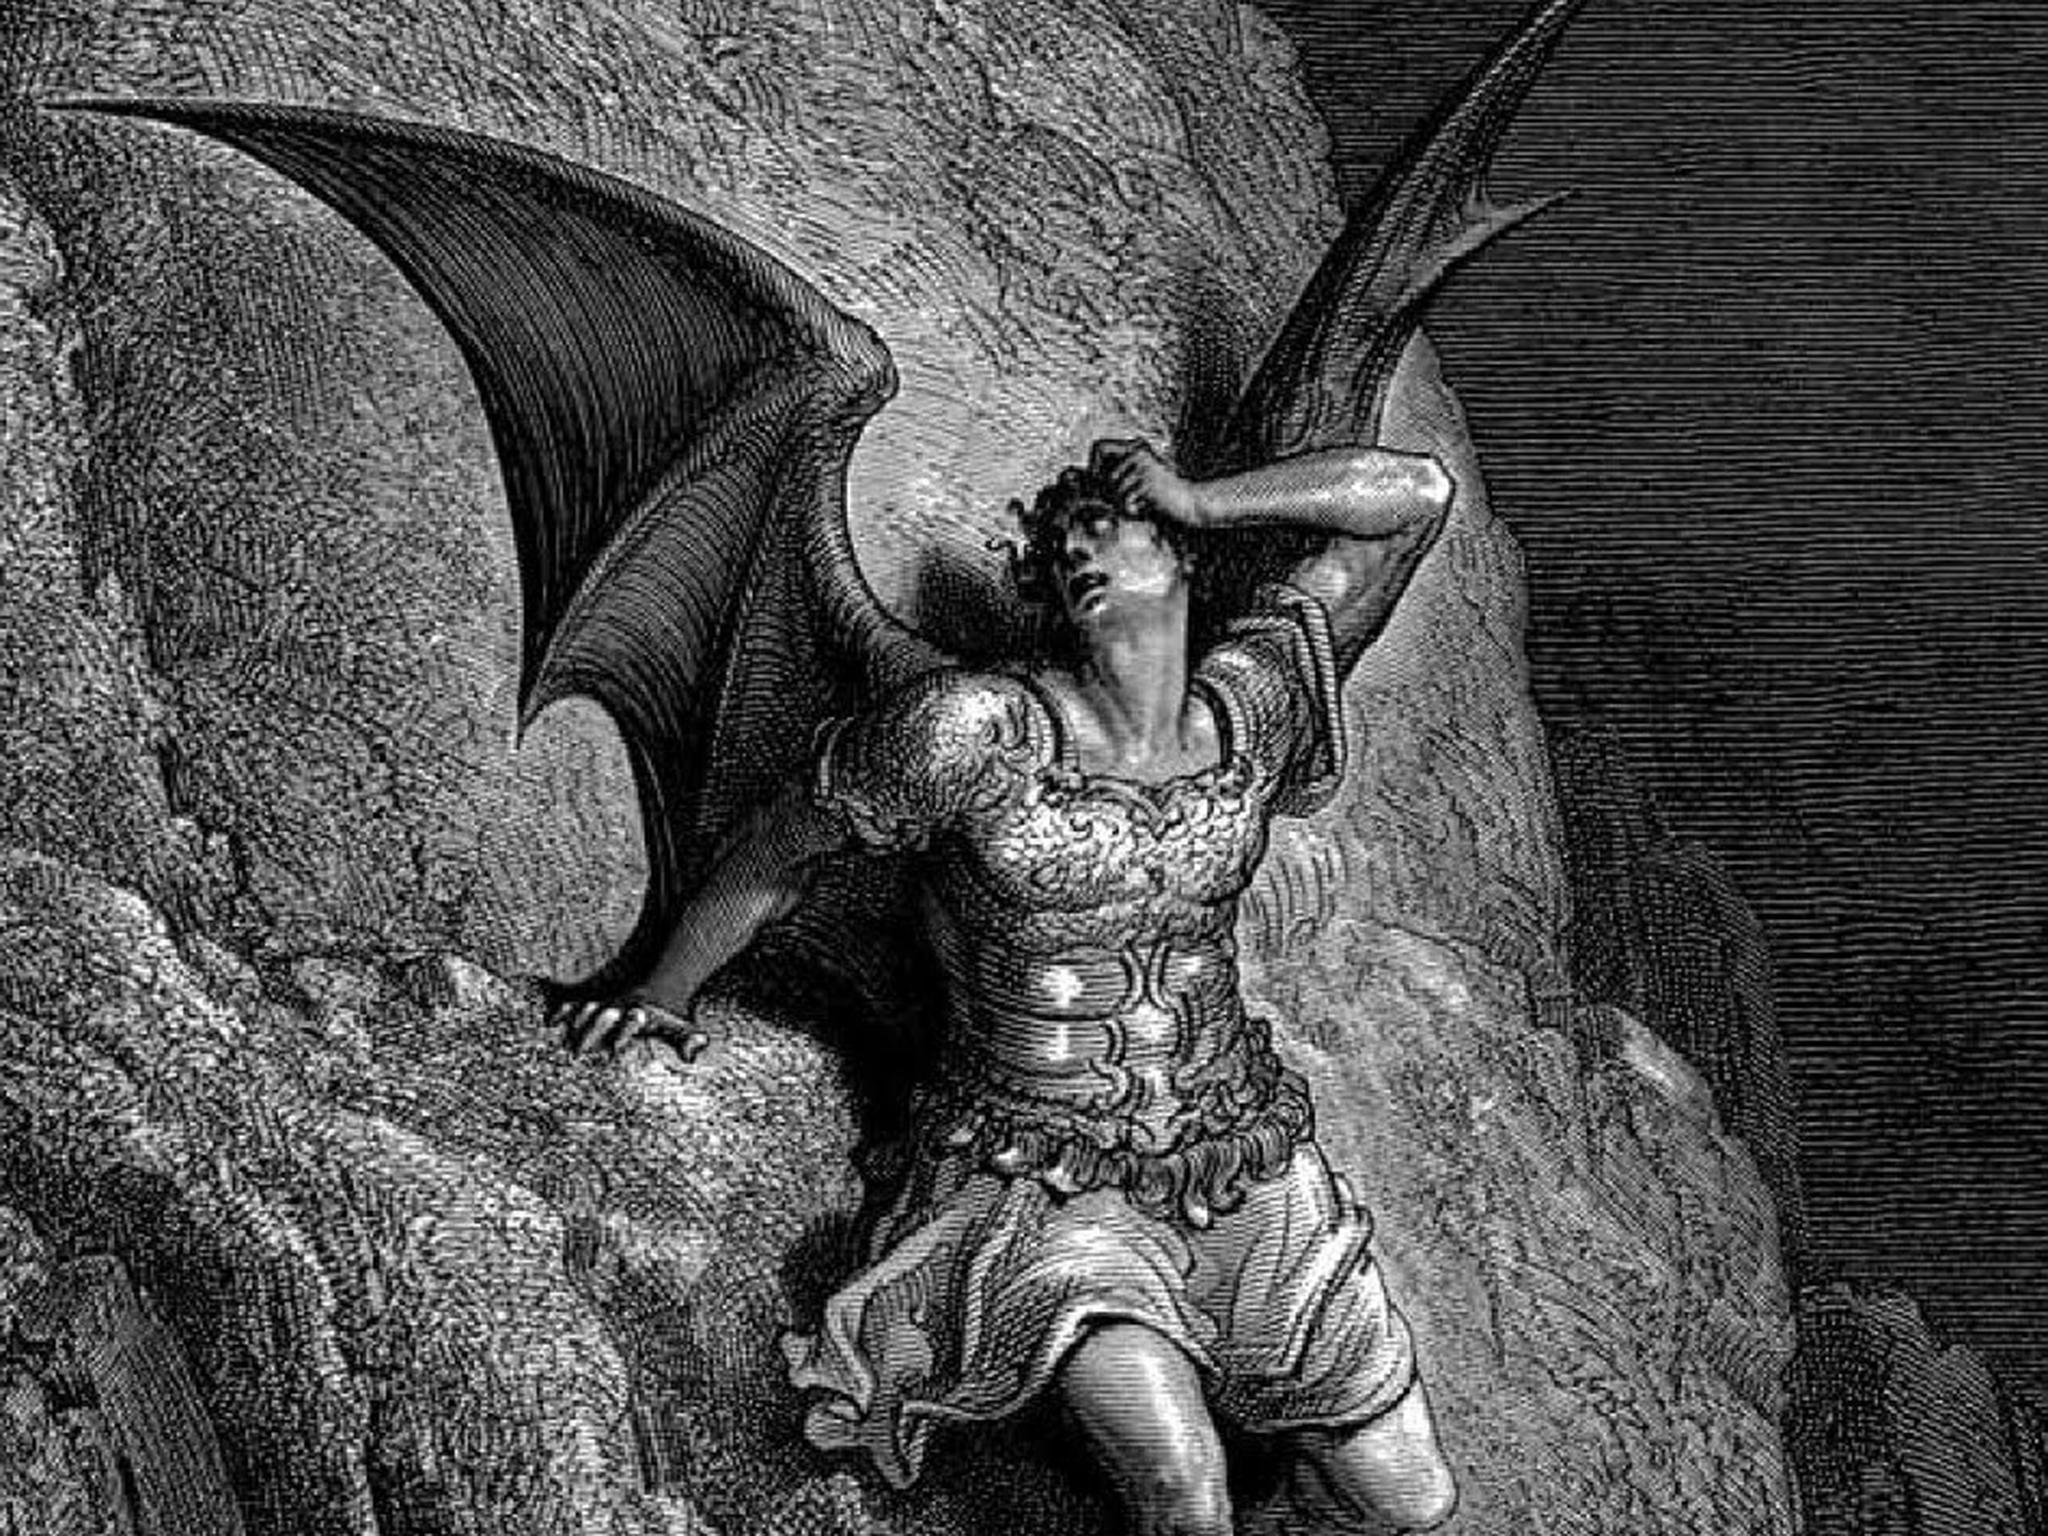 An depiction of Satan from a 19th century illustration of Paradise Lost by John Milton. Most satanists do not actually worship Satan